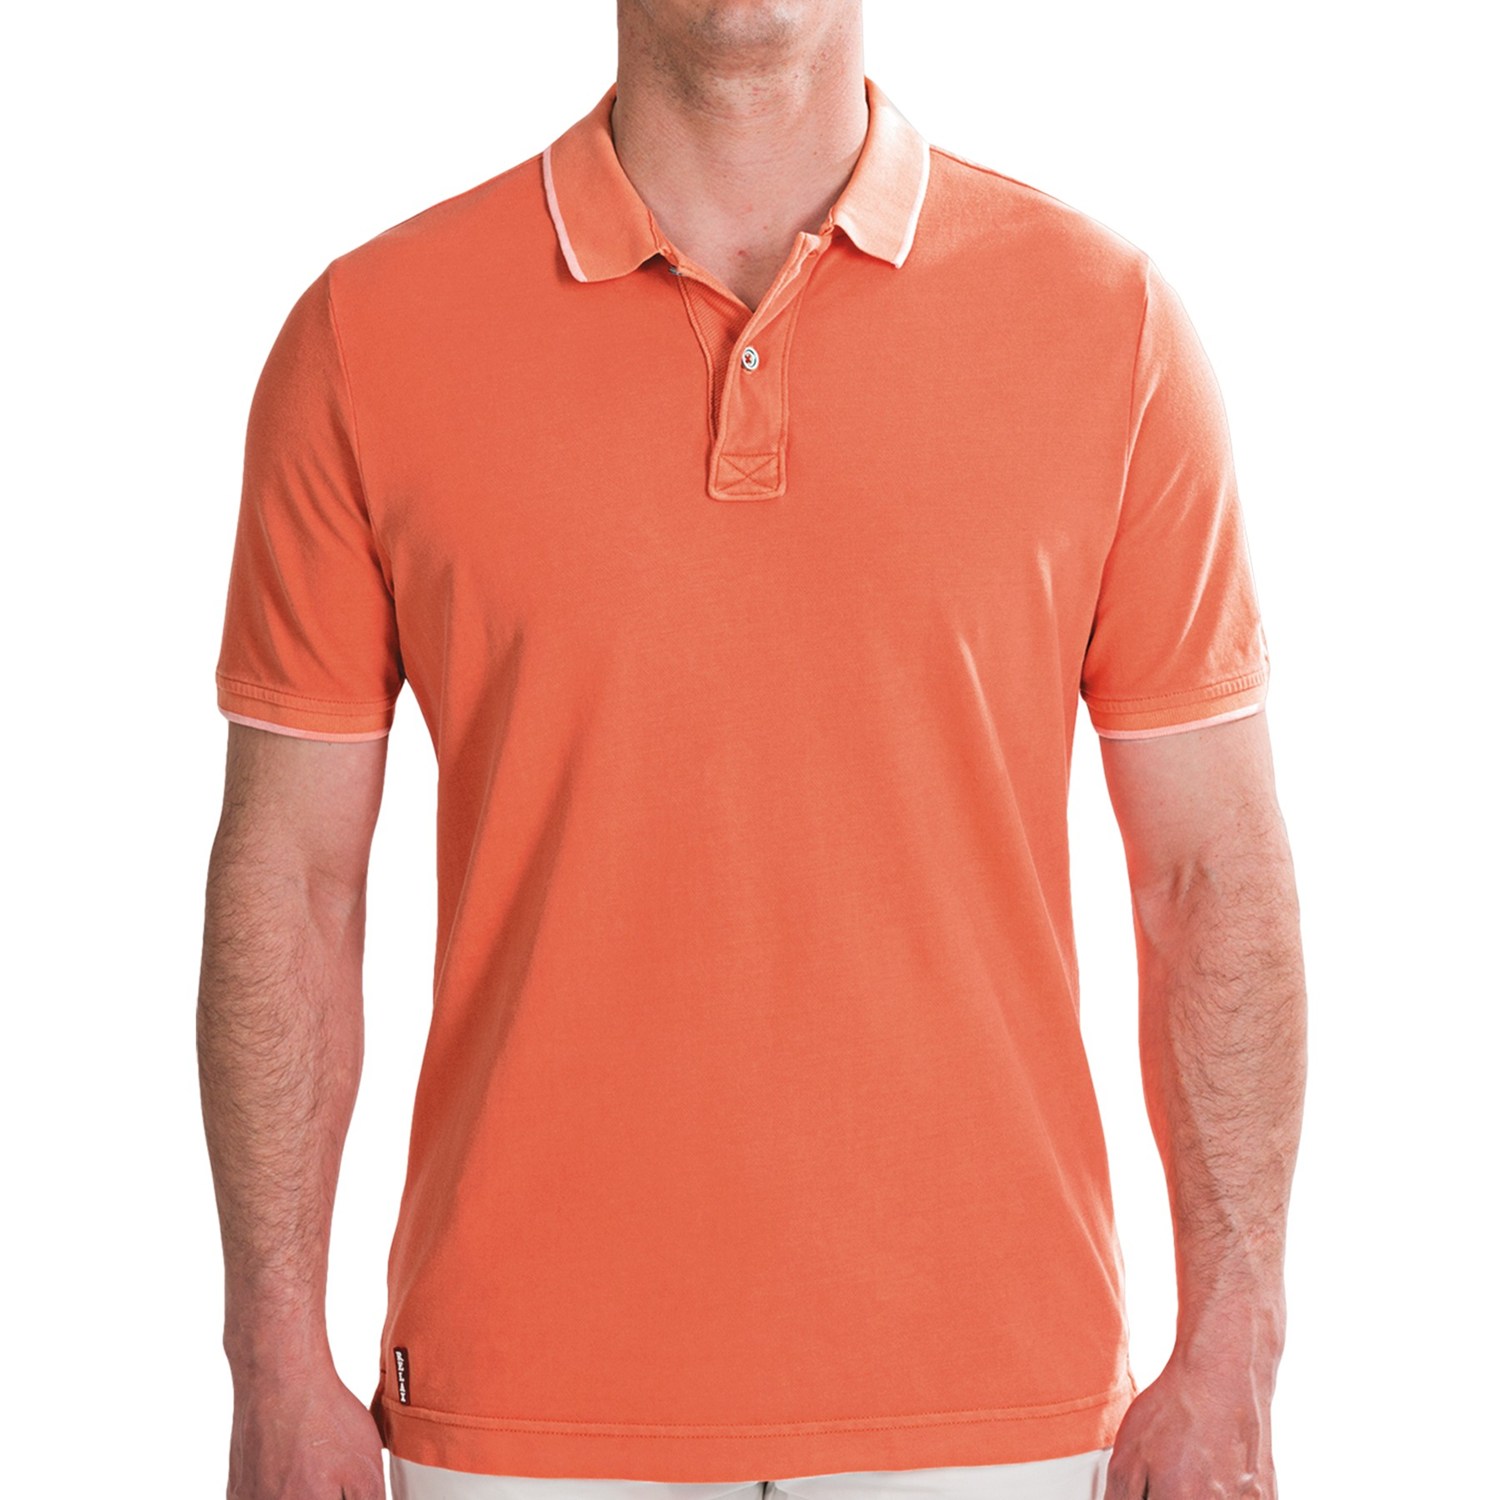 MEN’S HIGH QUALITY SOLID COLOR WASHED POLO SHIRT